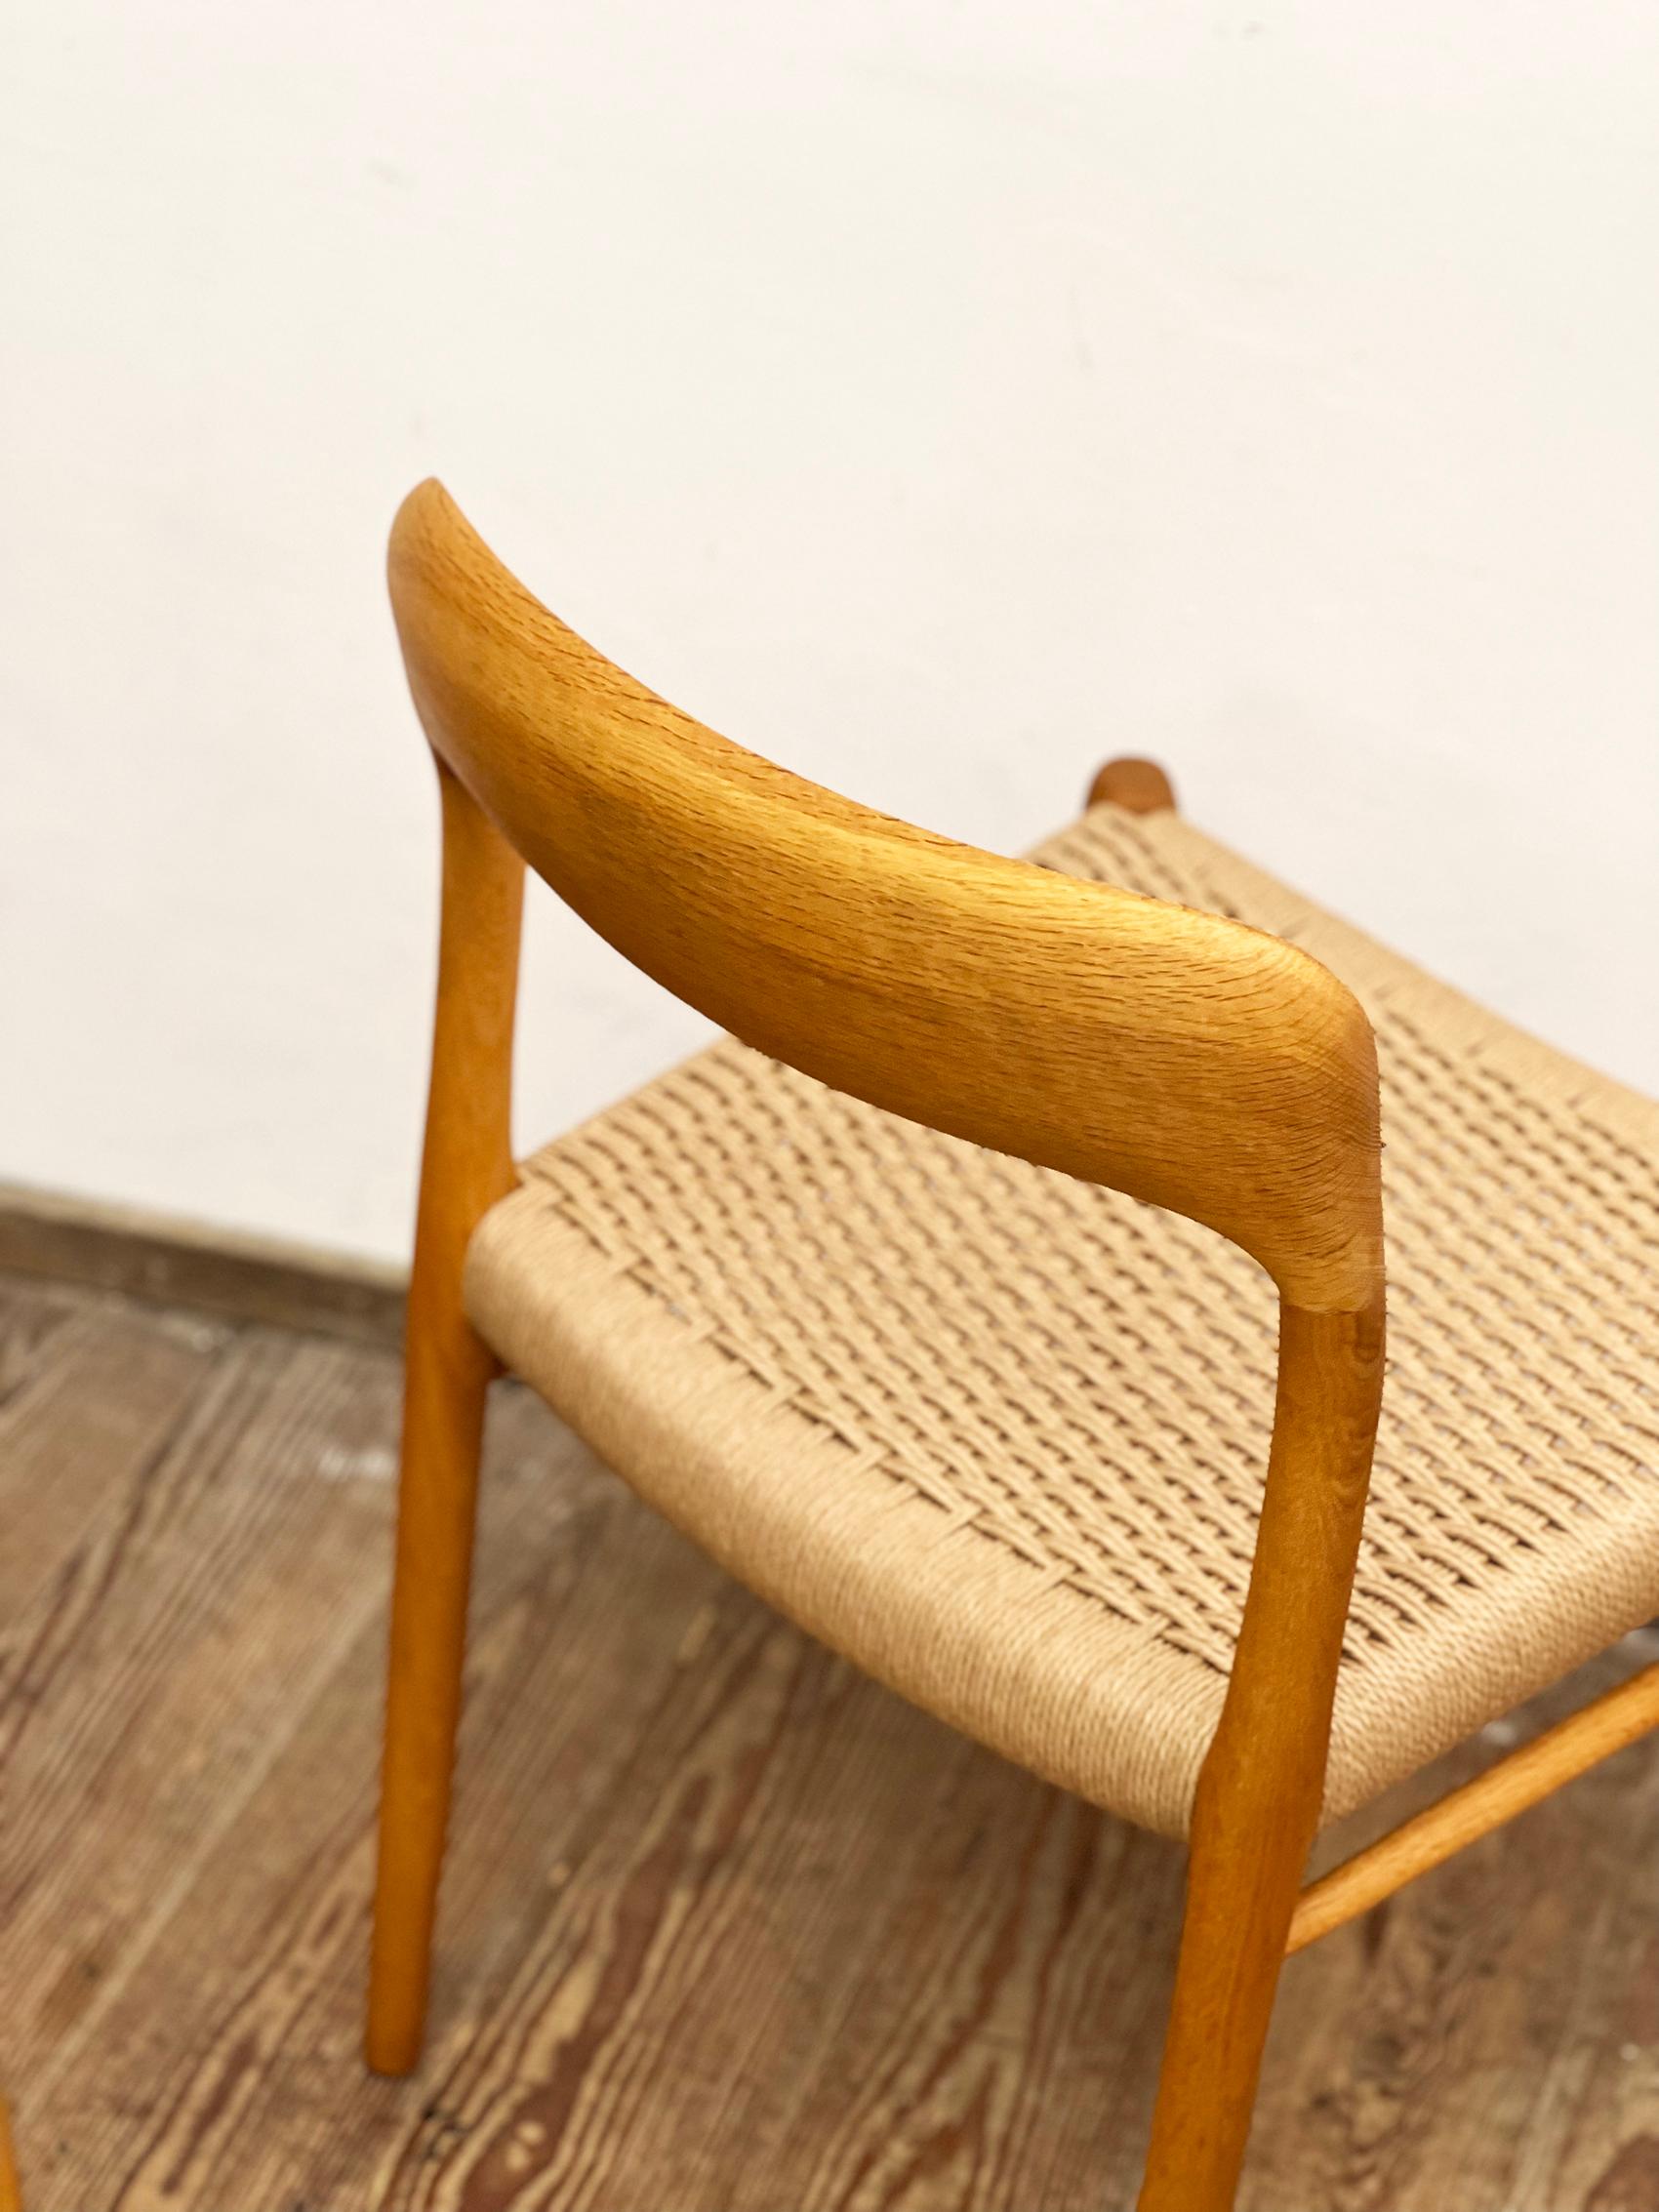 Papercord Pair of Mid-Century Oak Dining Chairs #75, Niels O. Møller for J. L. Moller For Sale